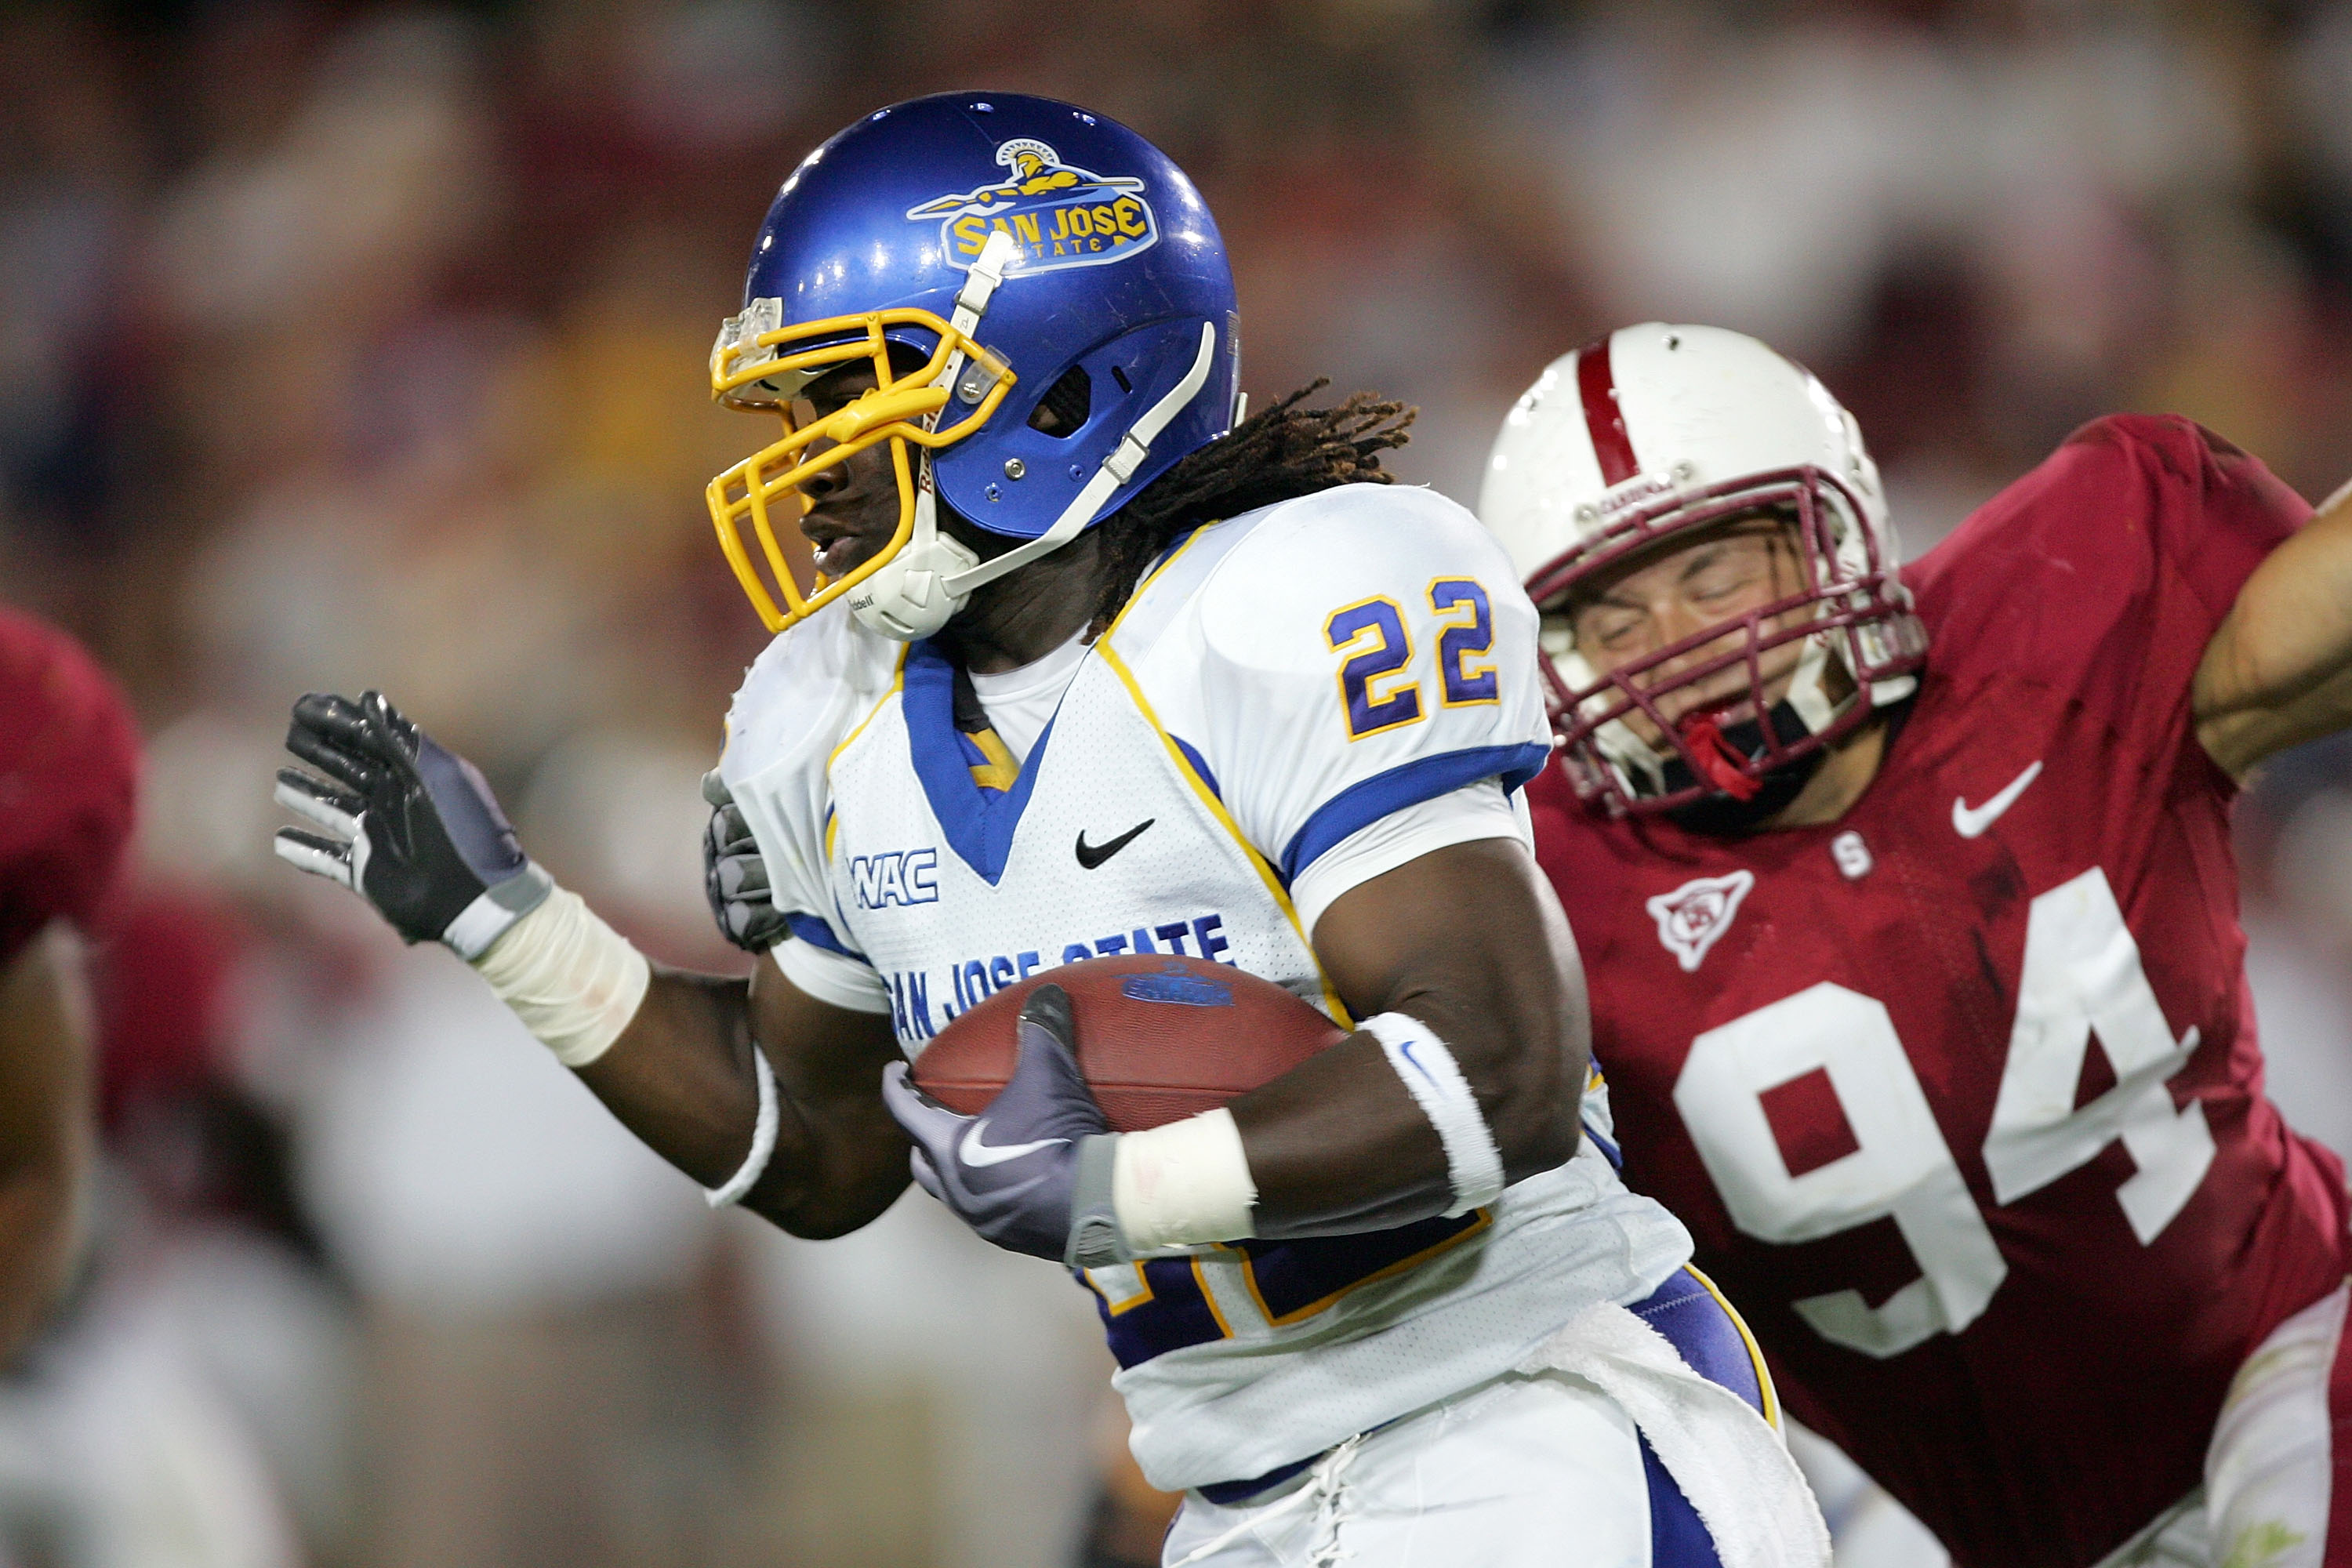 PALO ALTO, CA - SEPTEMBER 19:  Lamon Muldrow #22 of the San Jose State Spartans runs past Thomas Keiser #94 of the Stanford Cardinal at Stanford Stadium on September 19, 2009 in Palo Alto, California.  (Photo by Ezra Shaw/Getty Images)